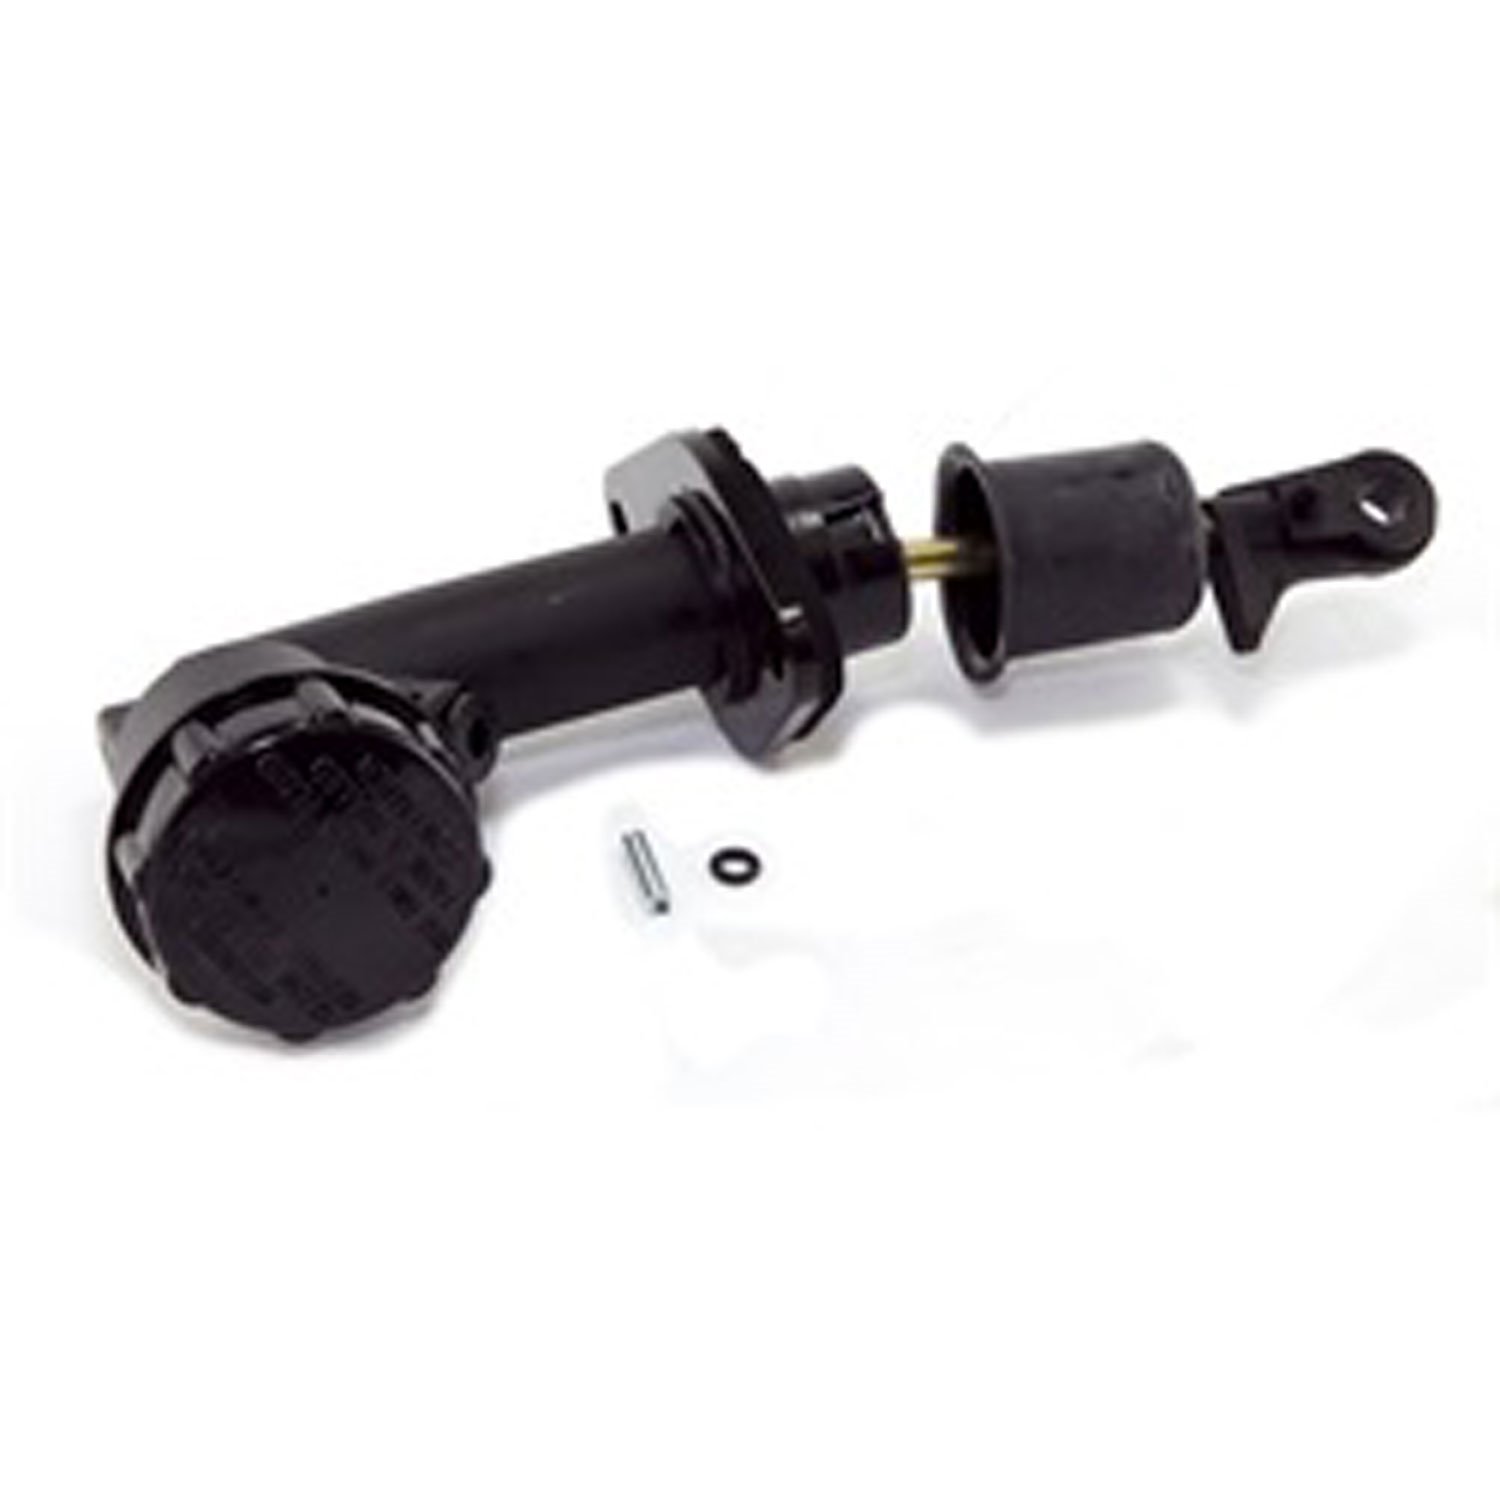 Replacement clutch master cylinder from Omix-ADA, Fits 94-96 Jeep Cherokee XJ